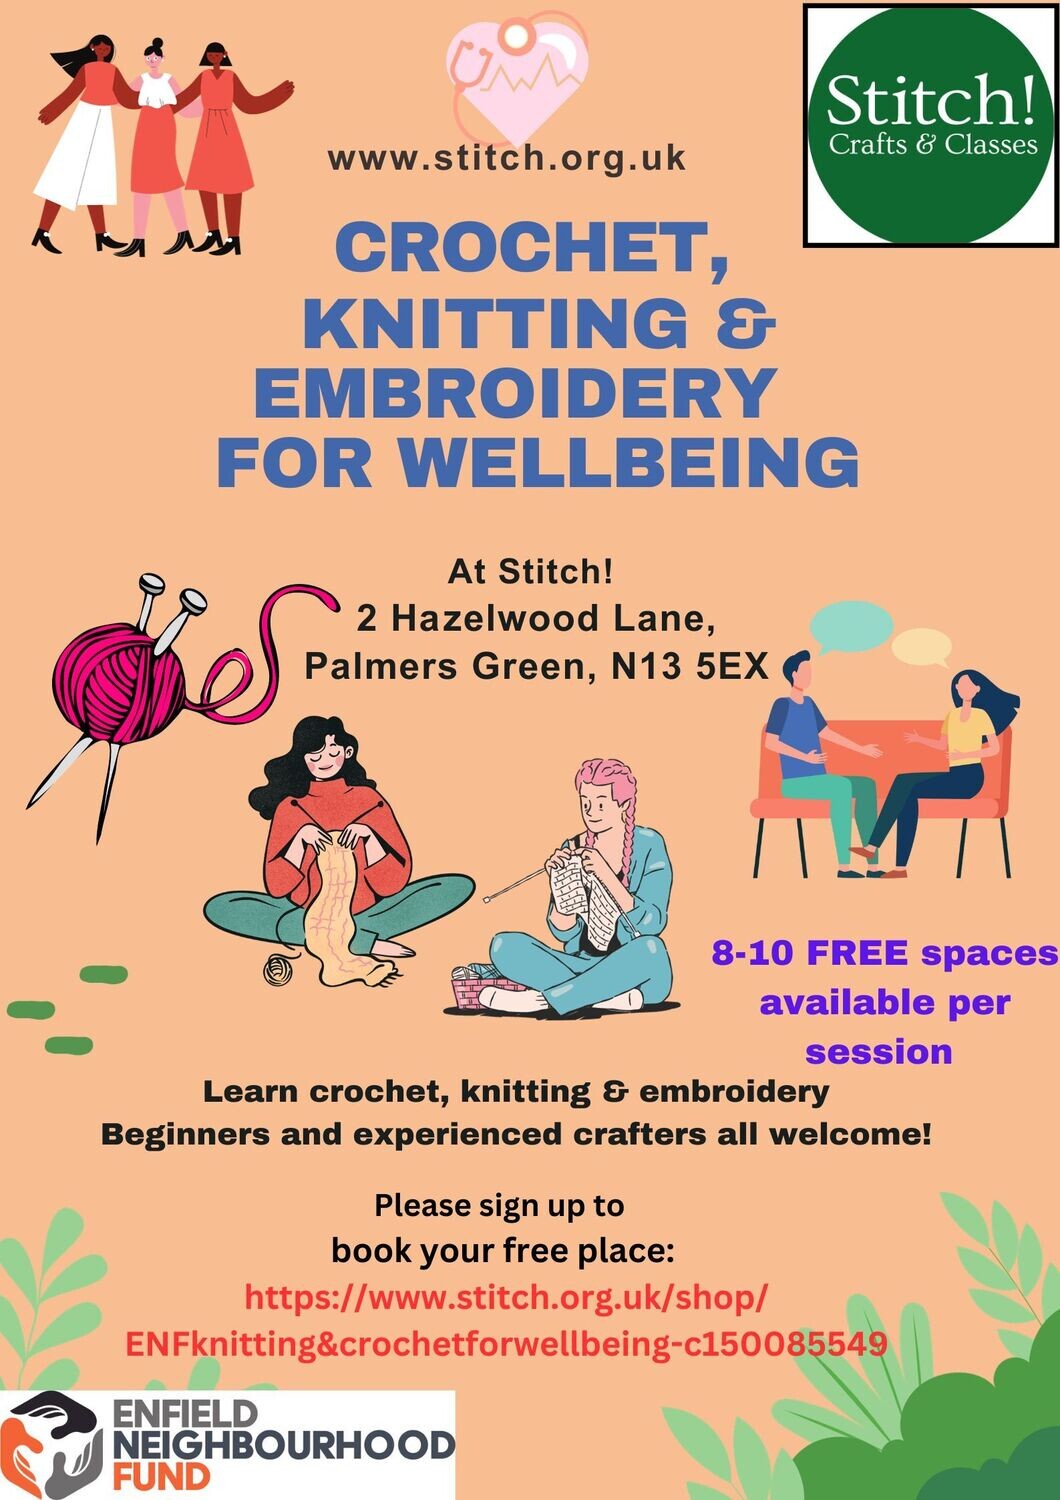 Crochet, Knitting & Embroidery for Wellbeing Workshop, Thursday 14th March, 11- 1pm